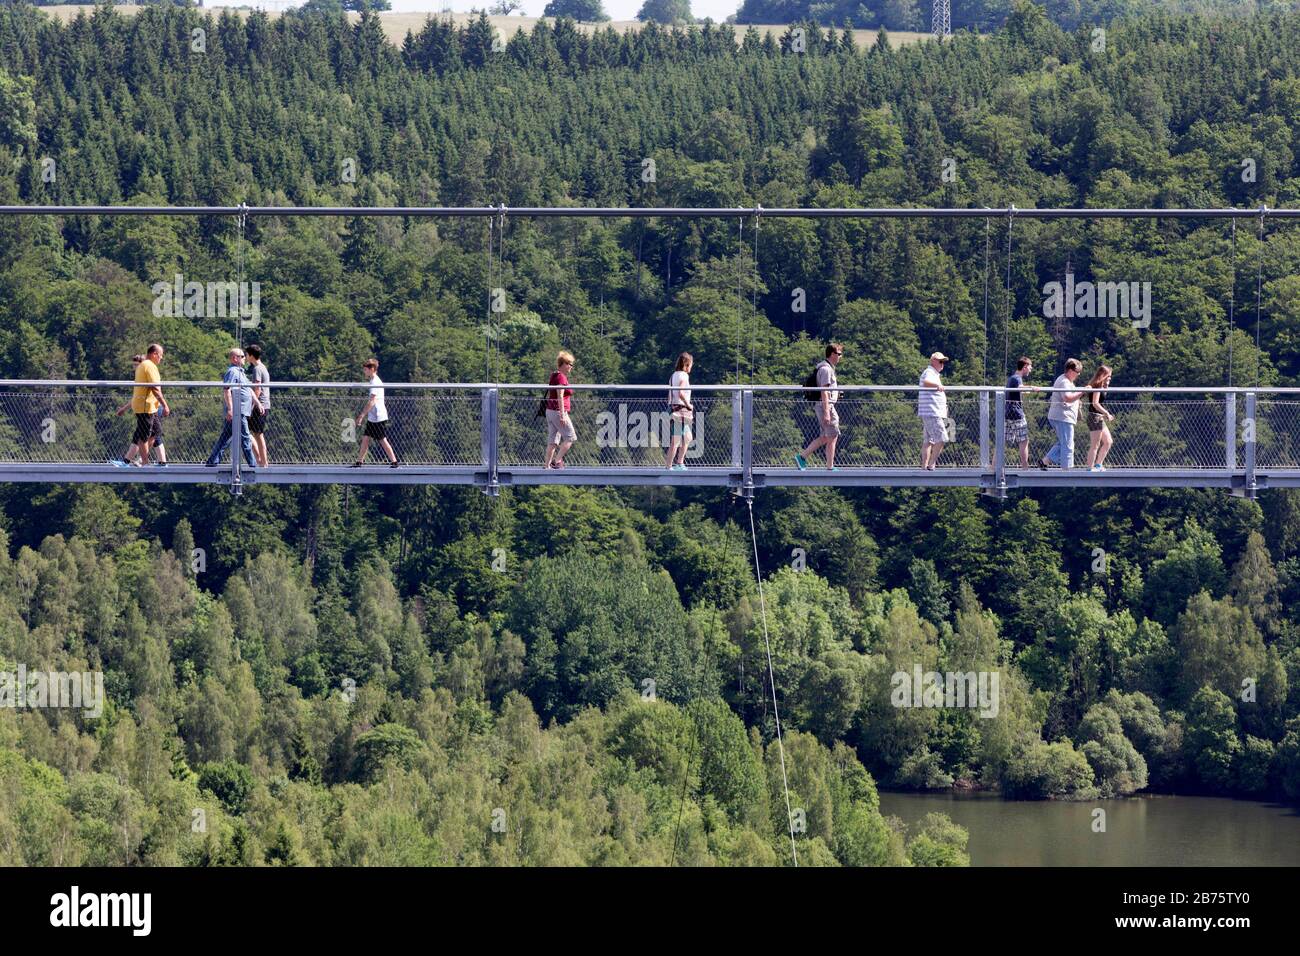 On 11.06.2017 visitors will walk over the rope suspension bridge at the Rappbode dam, 483 metres long, 100 metres above the valley floor. [automated translation] Stock Photo